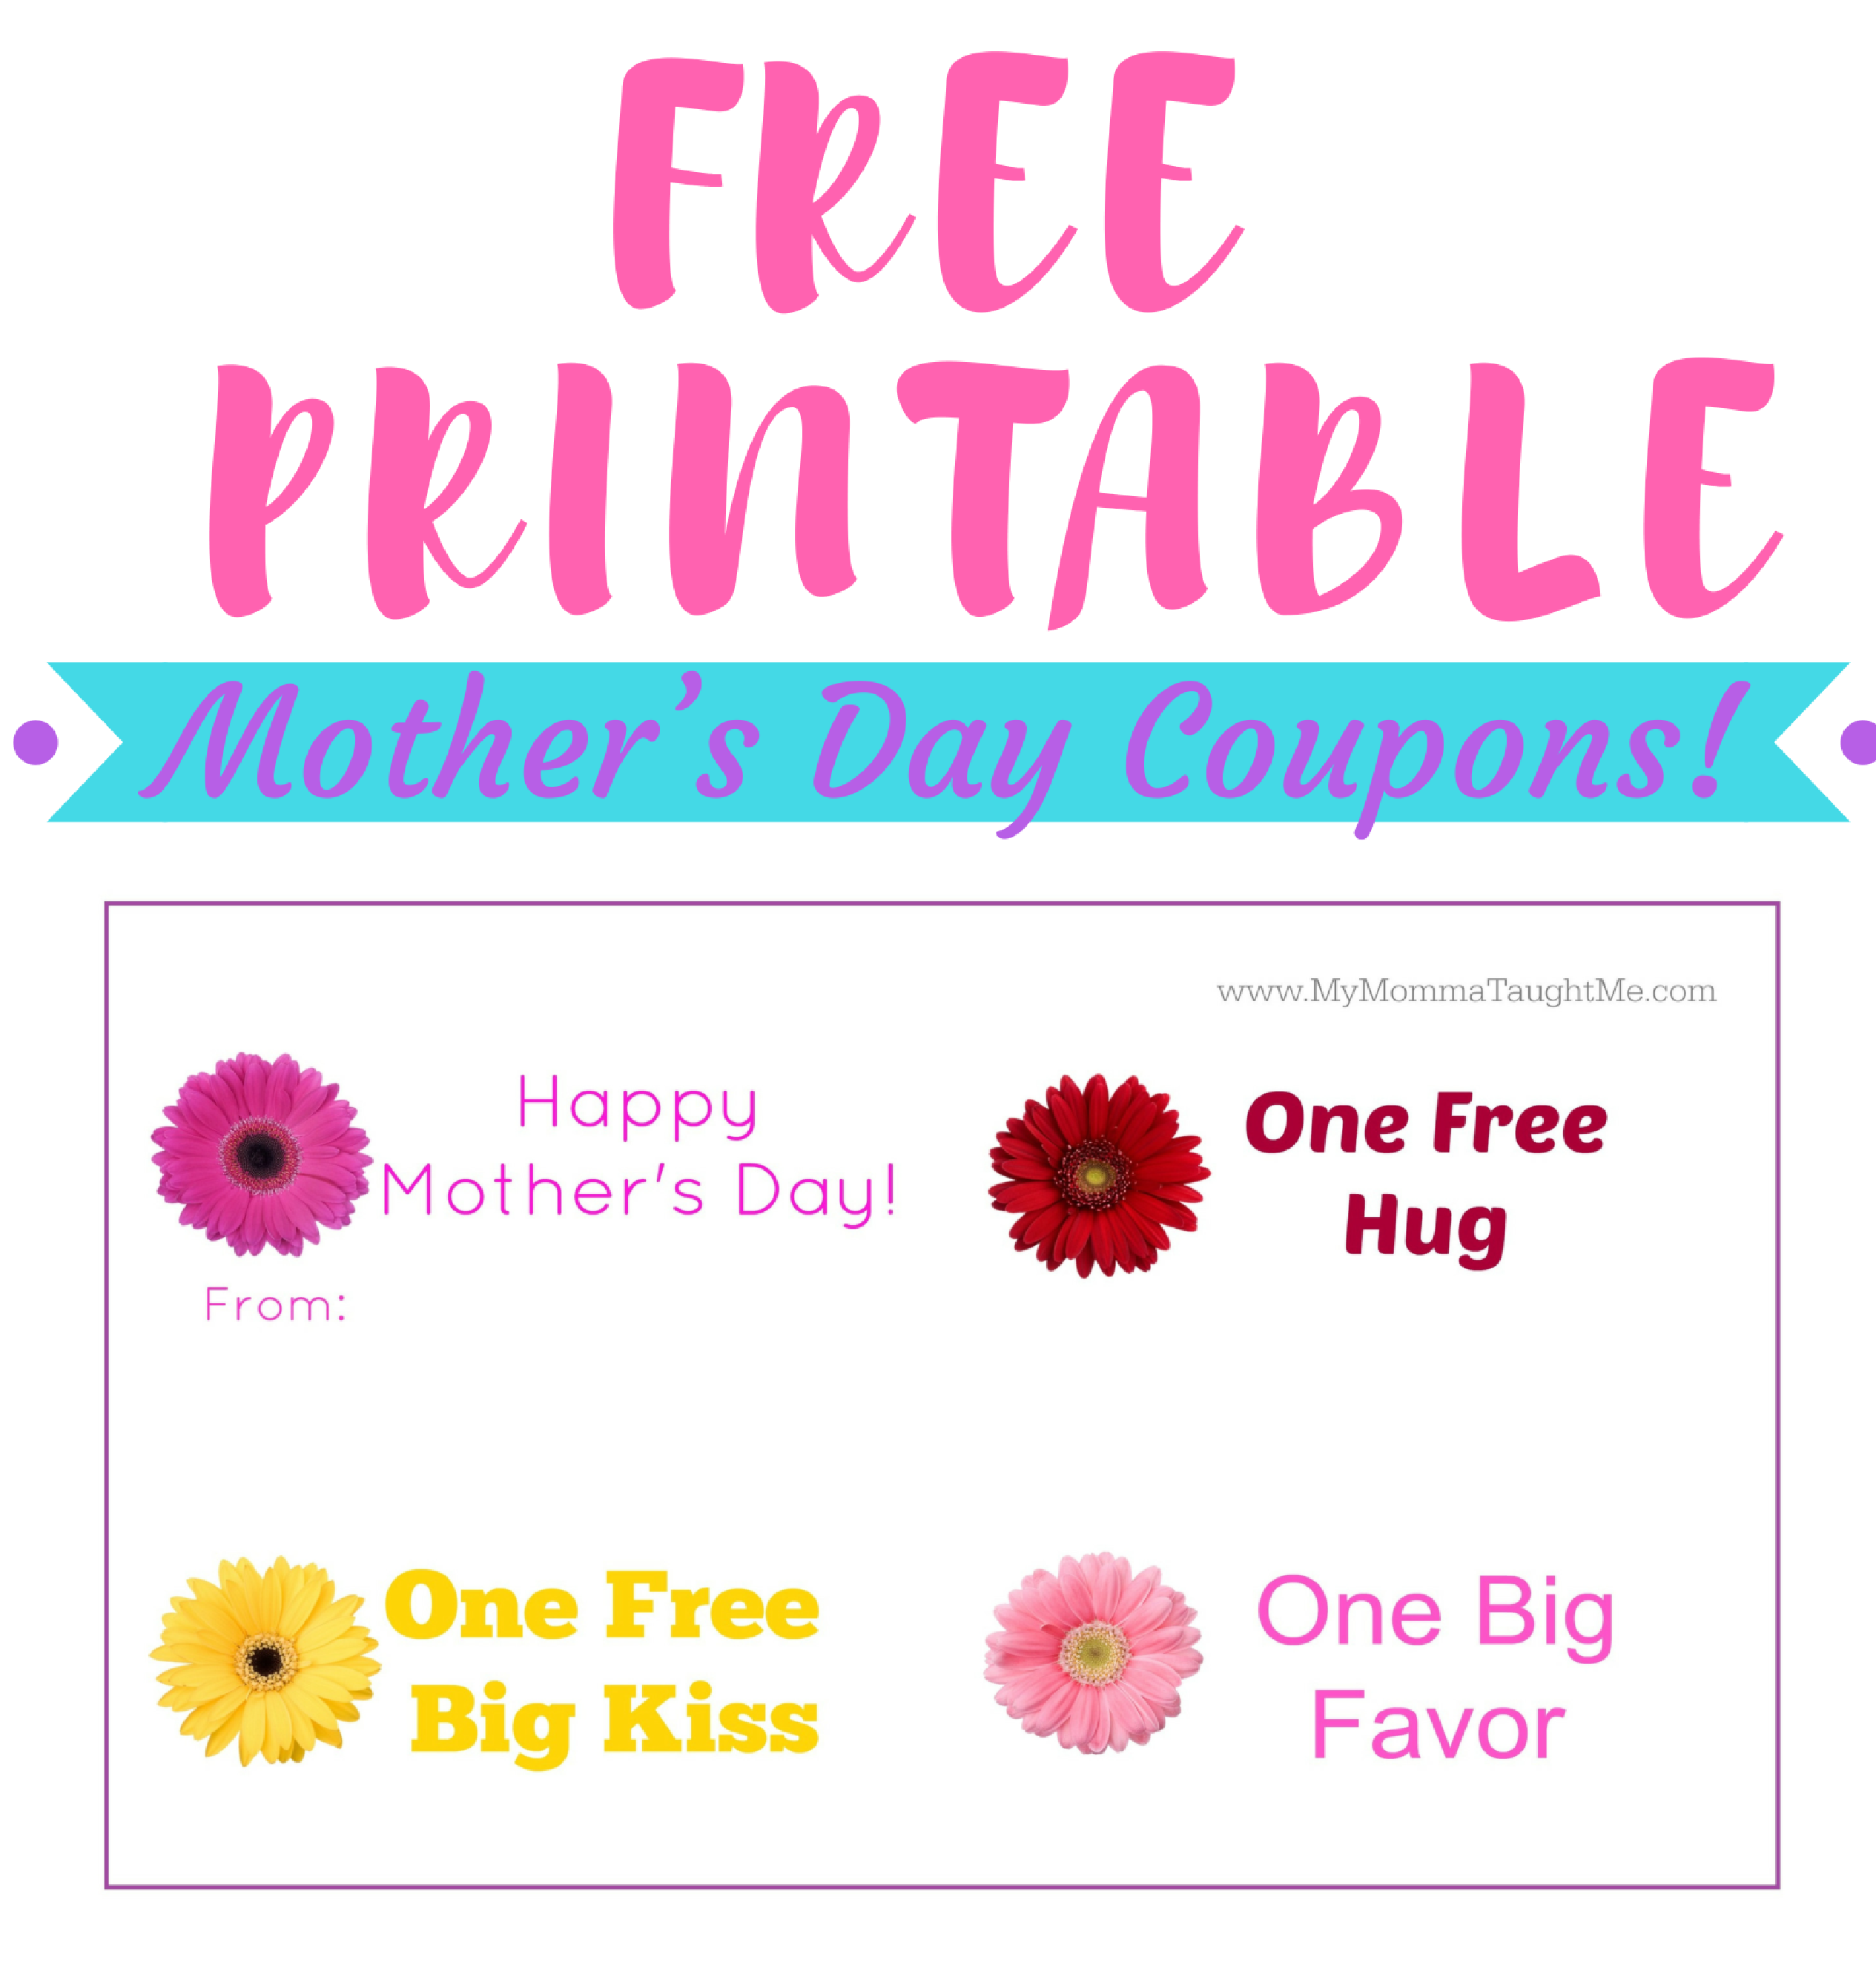 FREE PRINTABLE Mothers Day Coupons